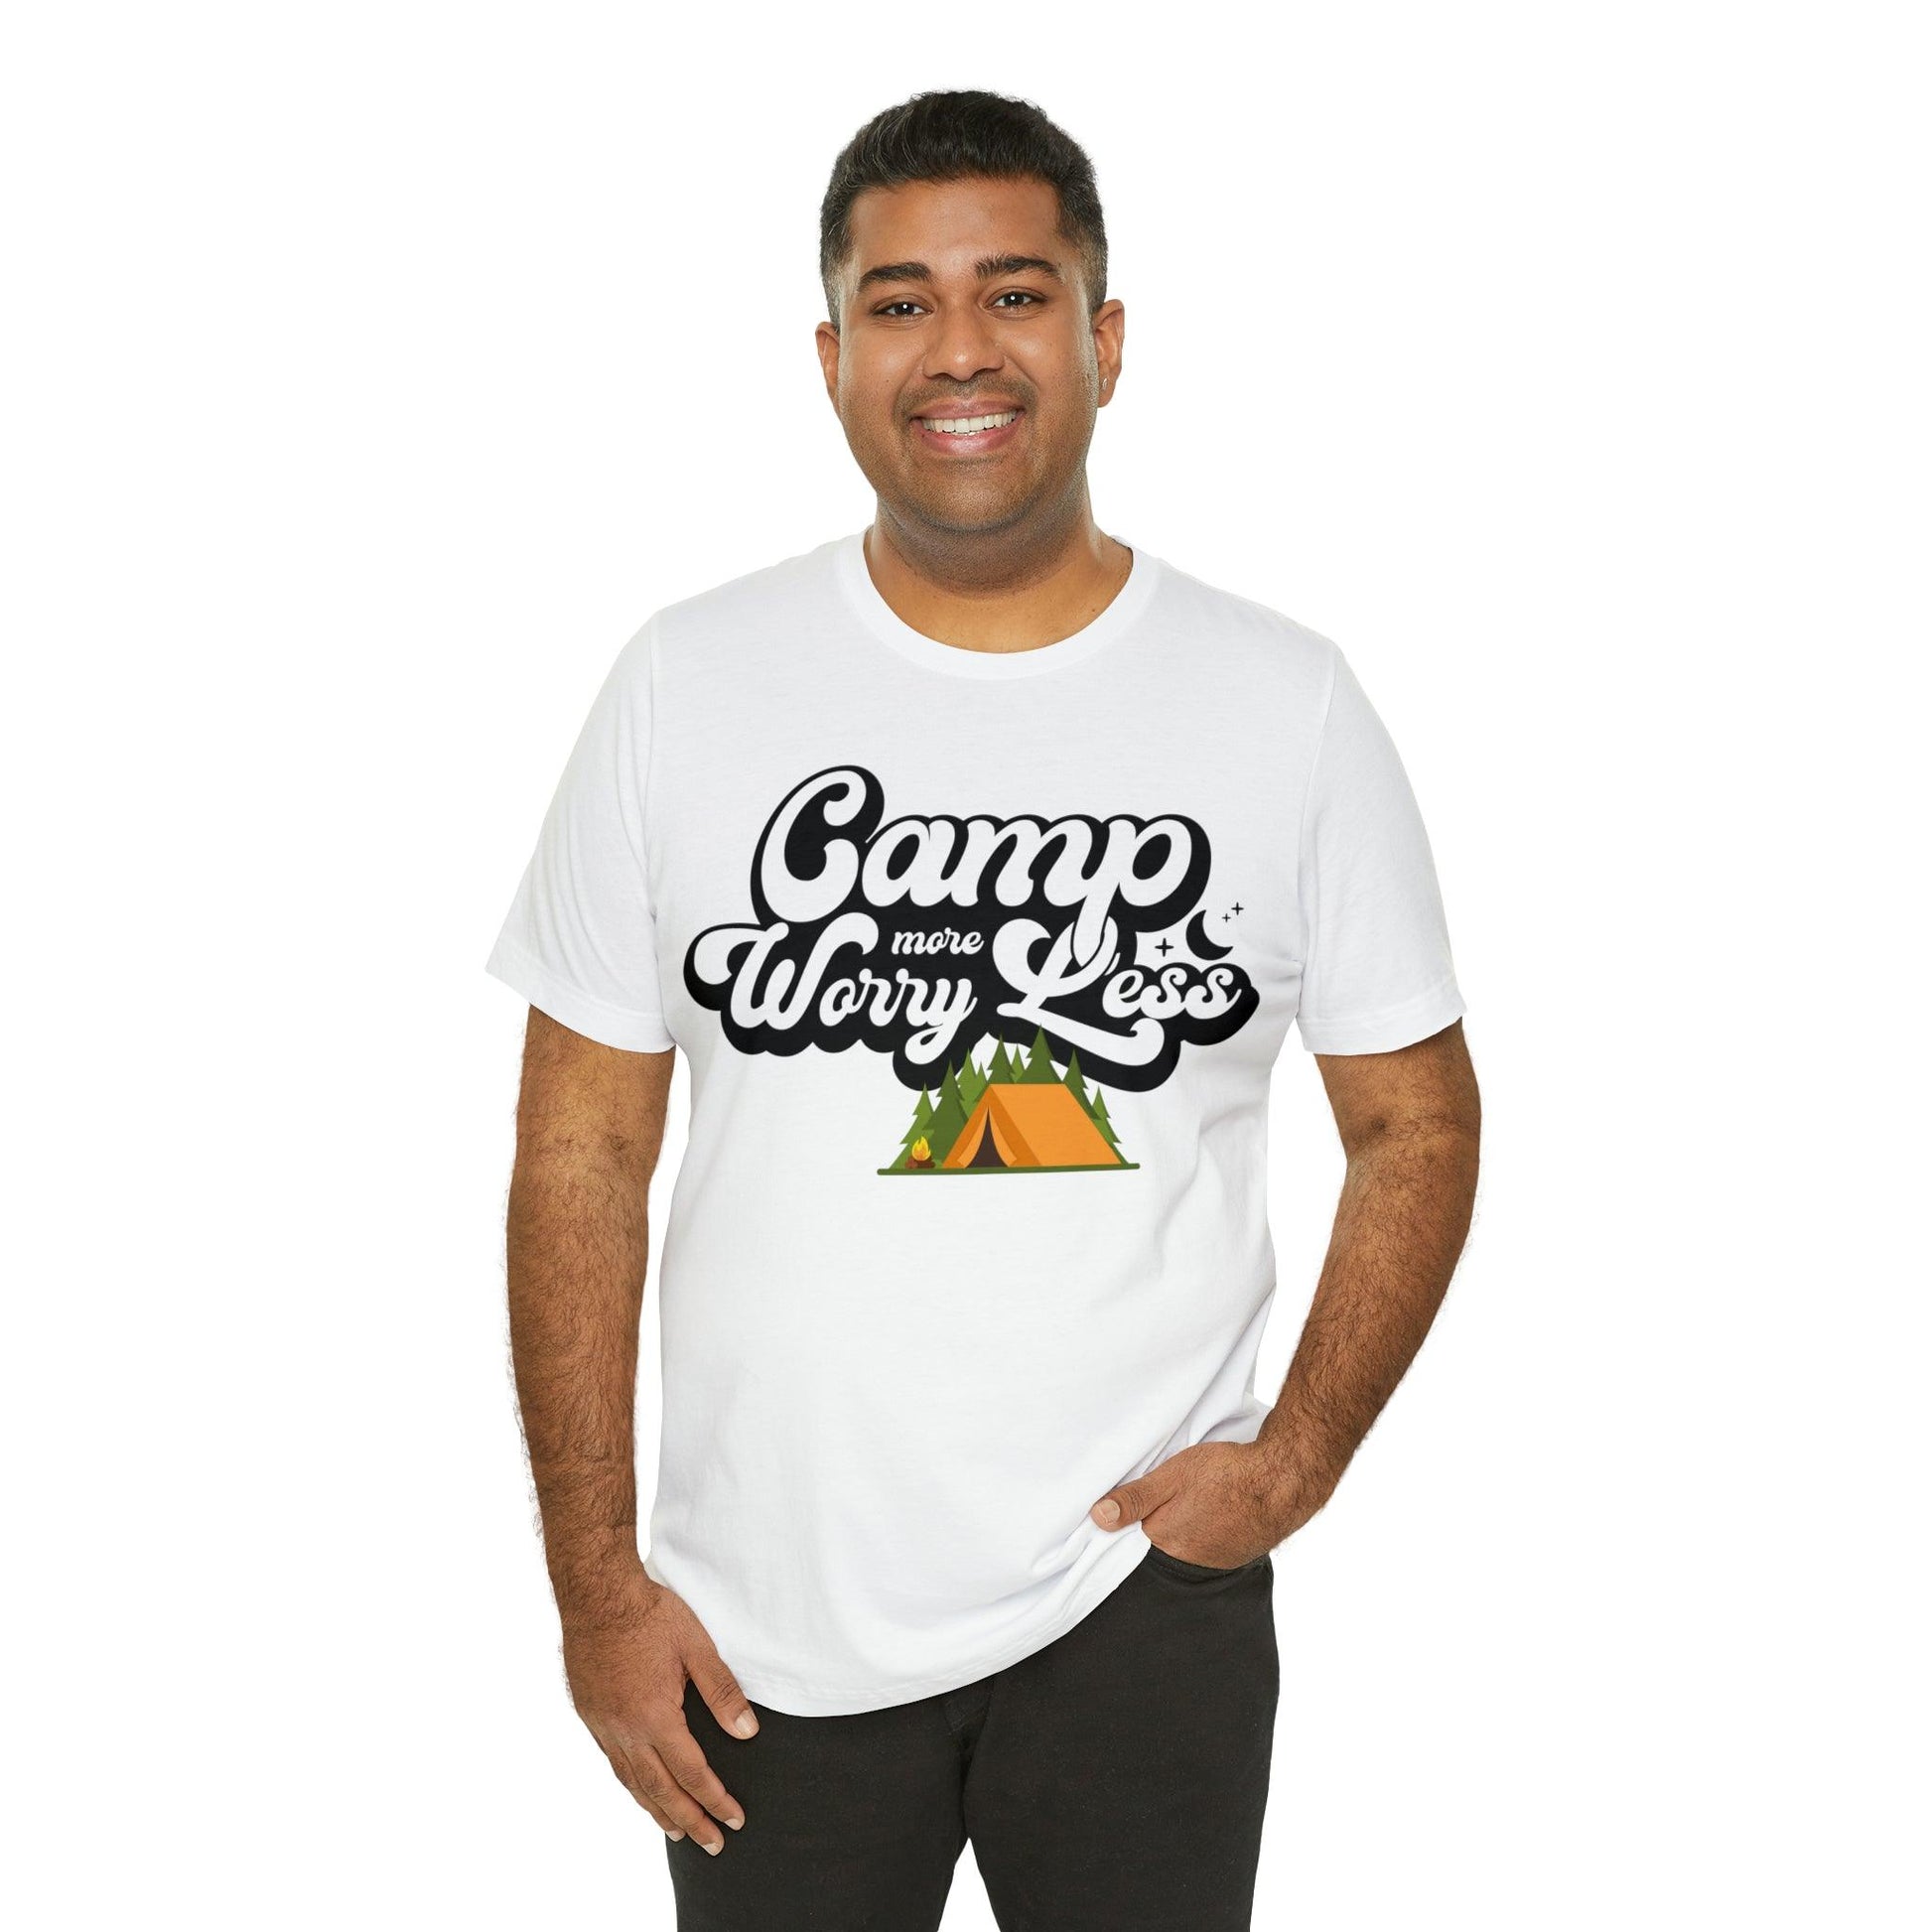 Camp More Worry Less Shirt, Outdoor adventure clothing, Nature-inspired shirts, Outdoor enthusiasts gift, Adventure-themed attire - Giftsmojo